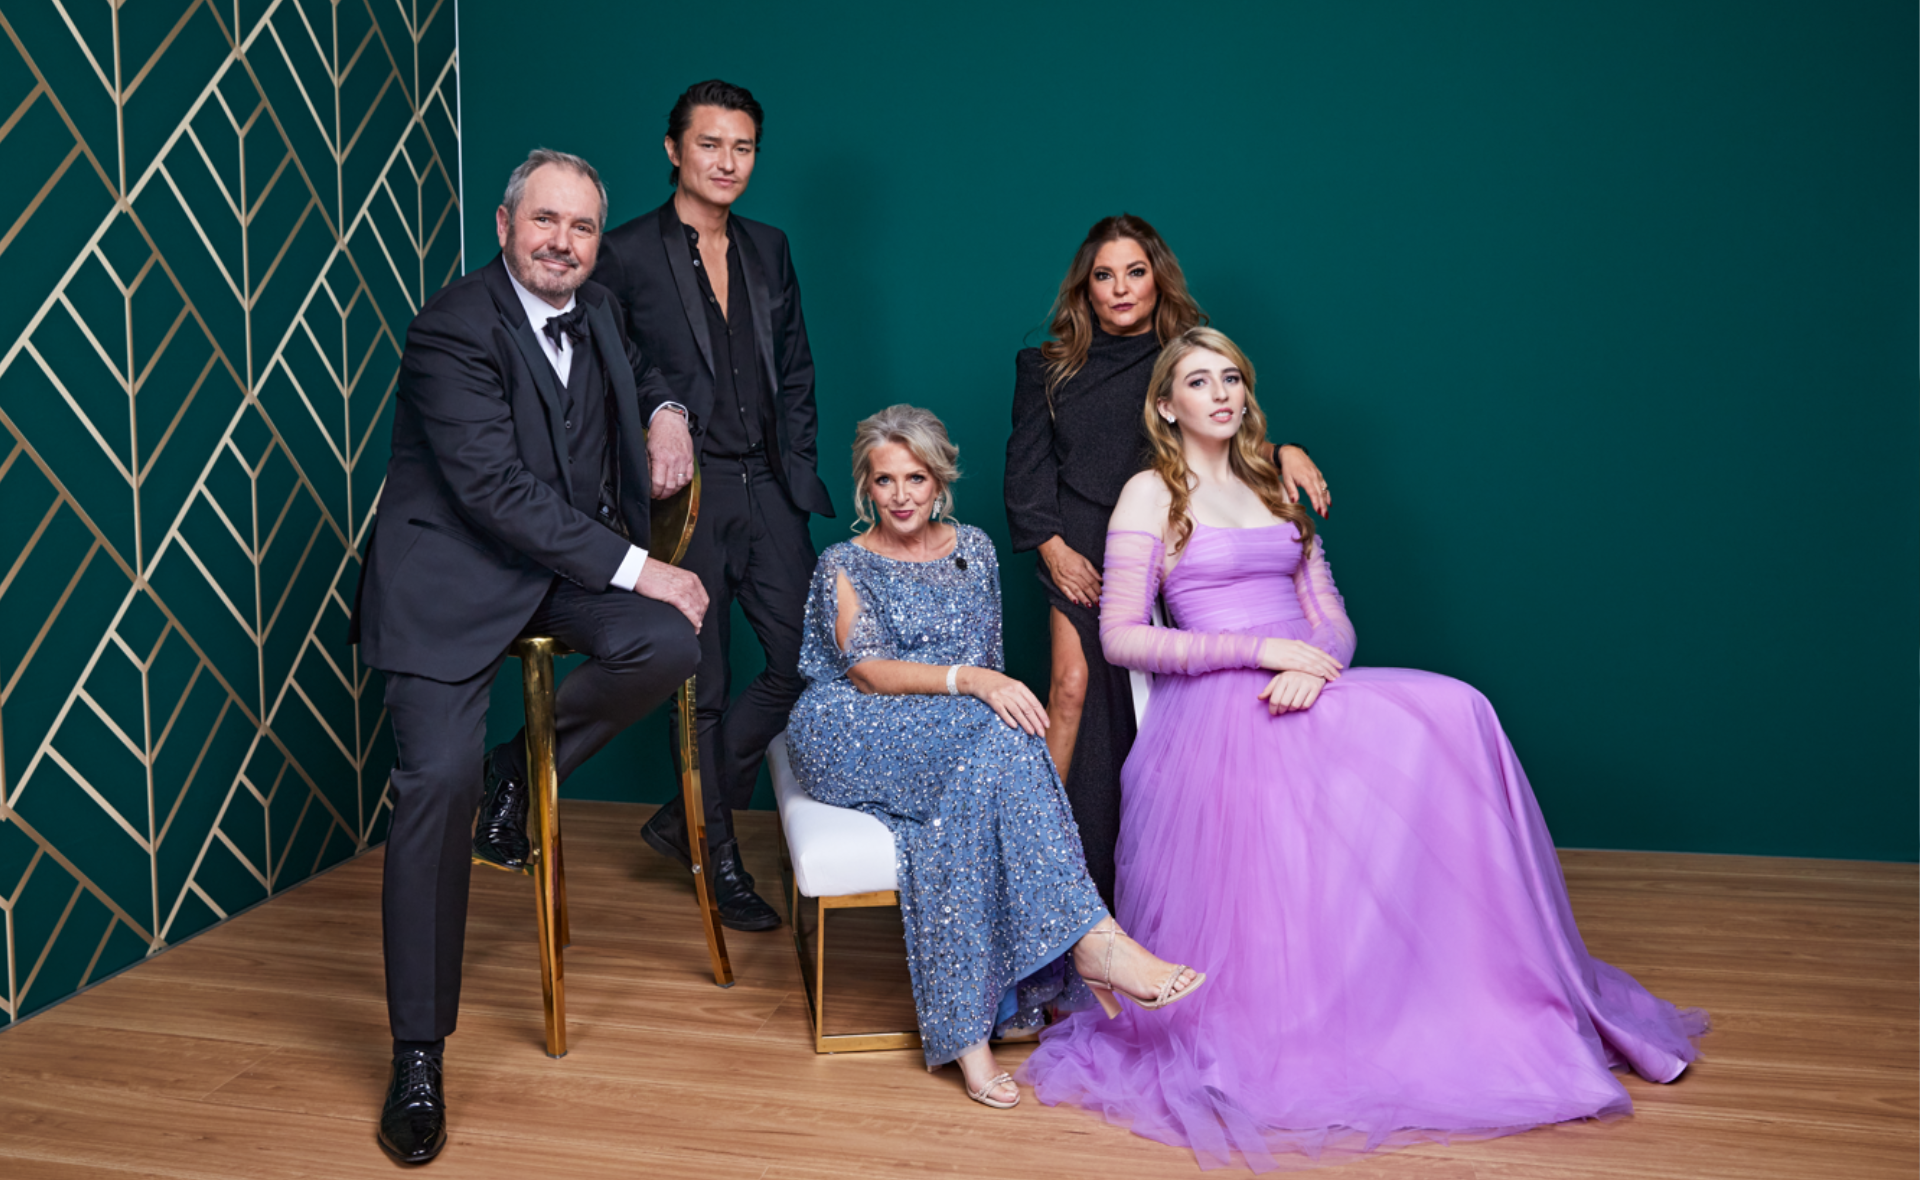 Alan Fletcher details what it’s like reuniting with his “family” on the Neighbours reboot set